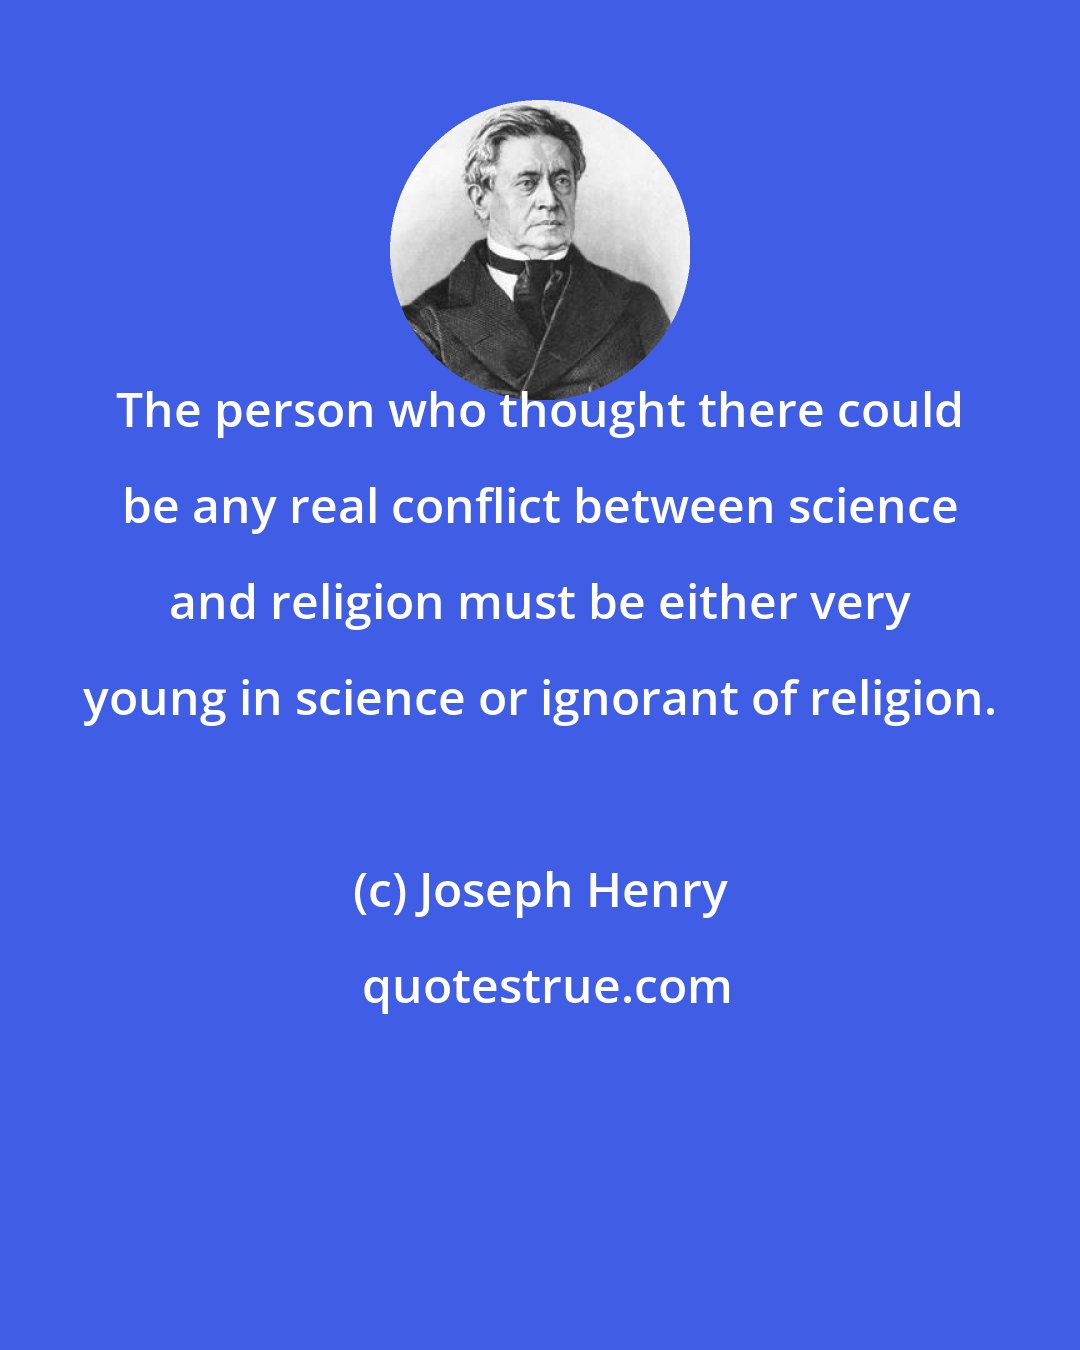 Joseph Henry: The person who thought there could be any real conflict between science and religion must be either very young in science or ignorant of religion.